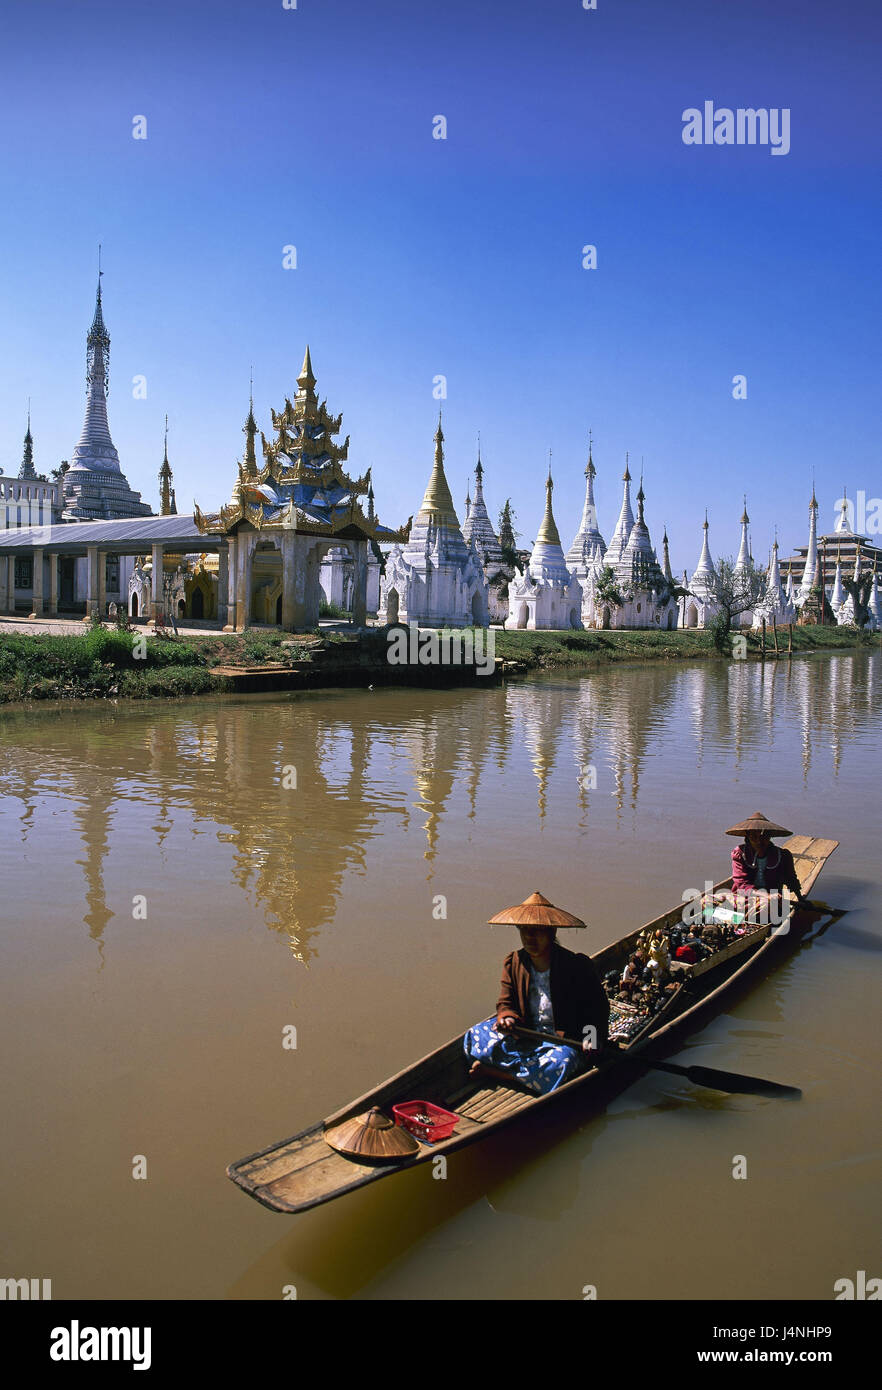 Myanmar, Ywama, Inle lake, boat, Phaung Daw U pagoda, Asia, South-East Asia, Shanstaat, lake, shore, lakeside, structure, towers, pagoda, place of interest, outside, dealer, wooden boot, person, Stock Photo